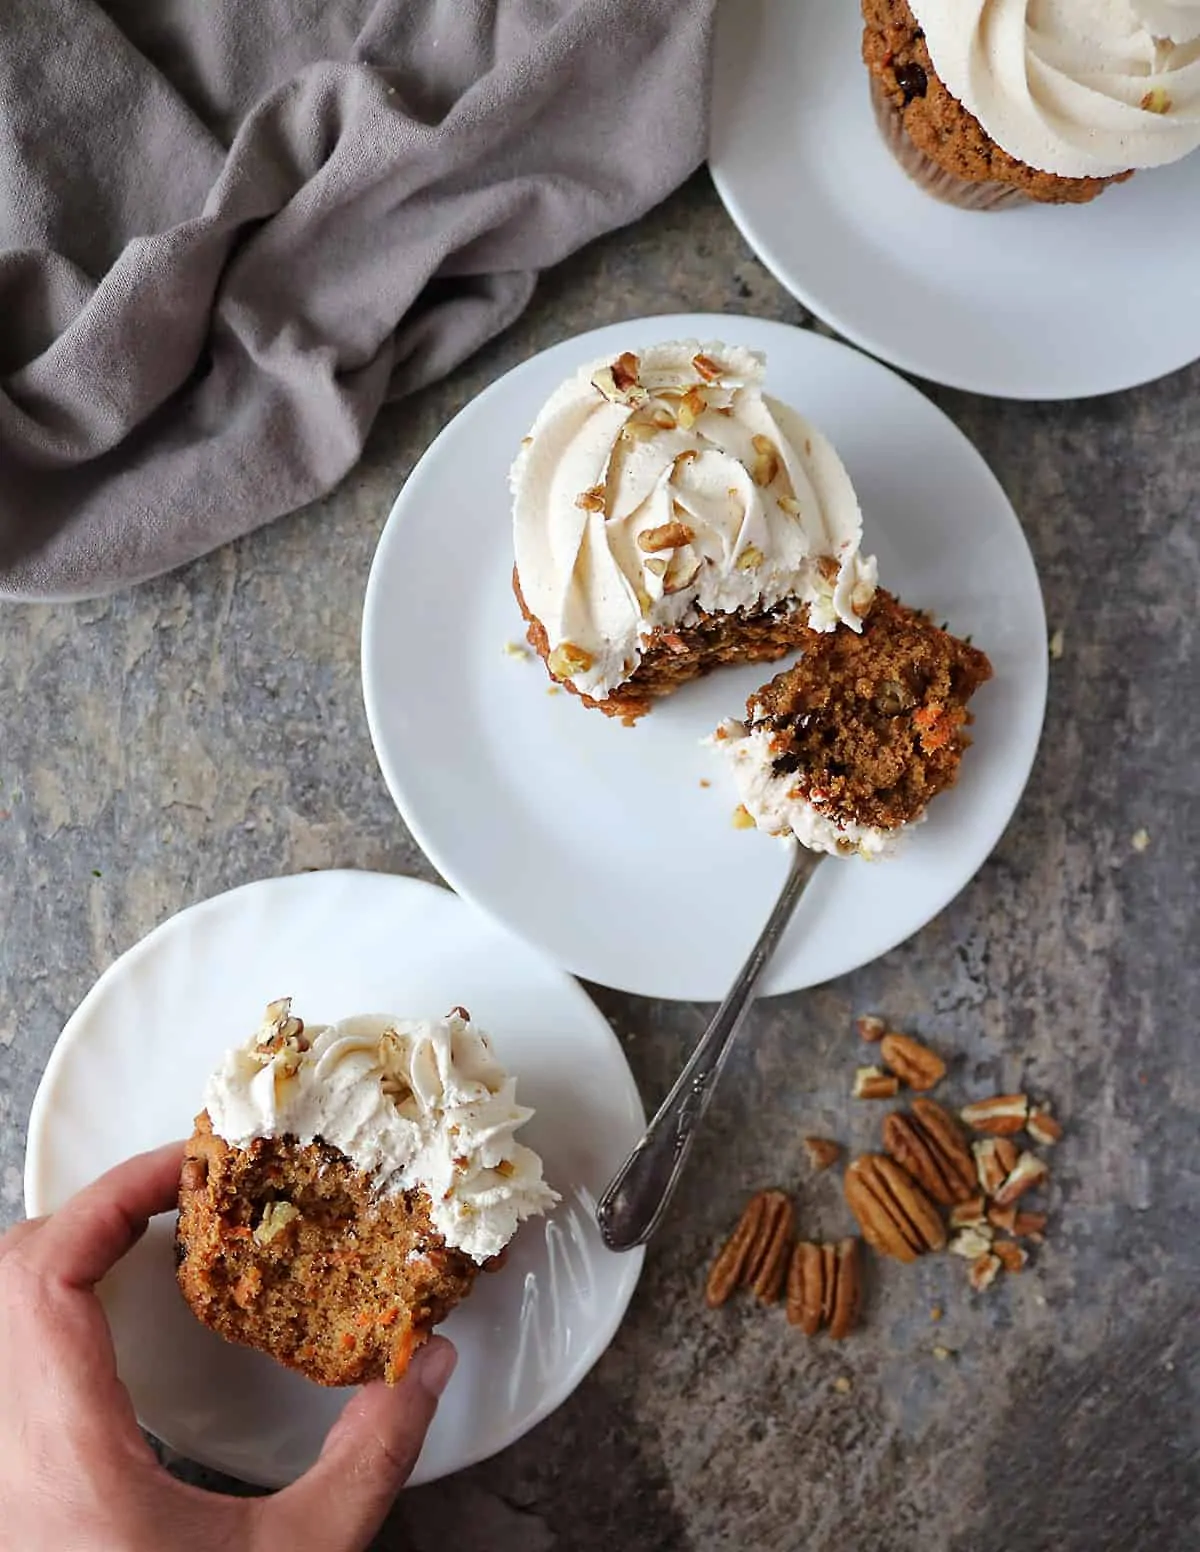 Mmoist and delicious, Easy Carrot Cake Cupcakes on plates.